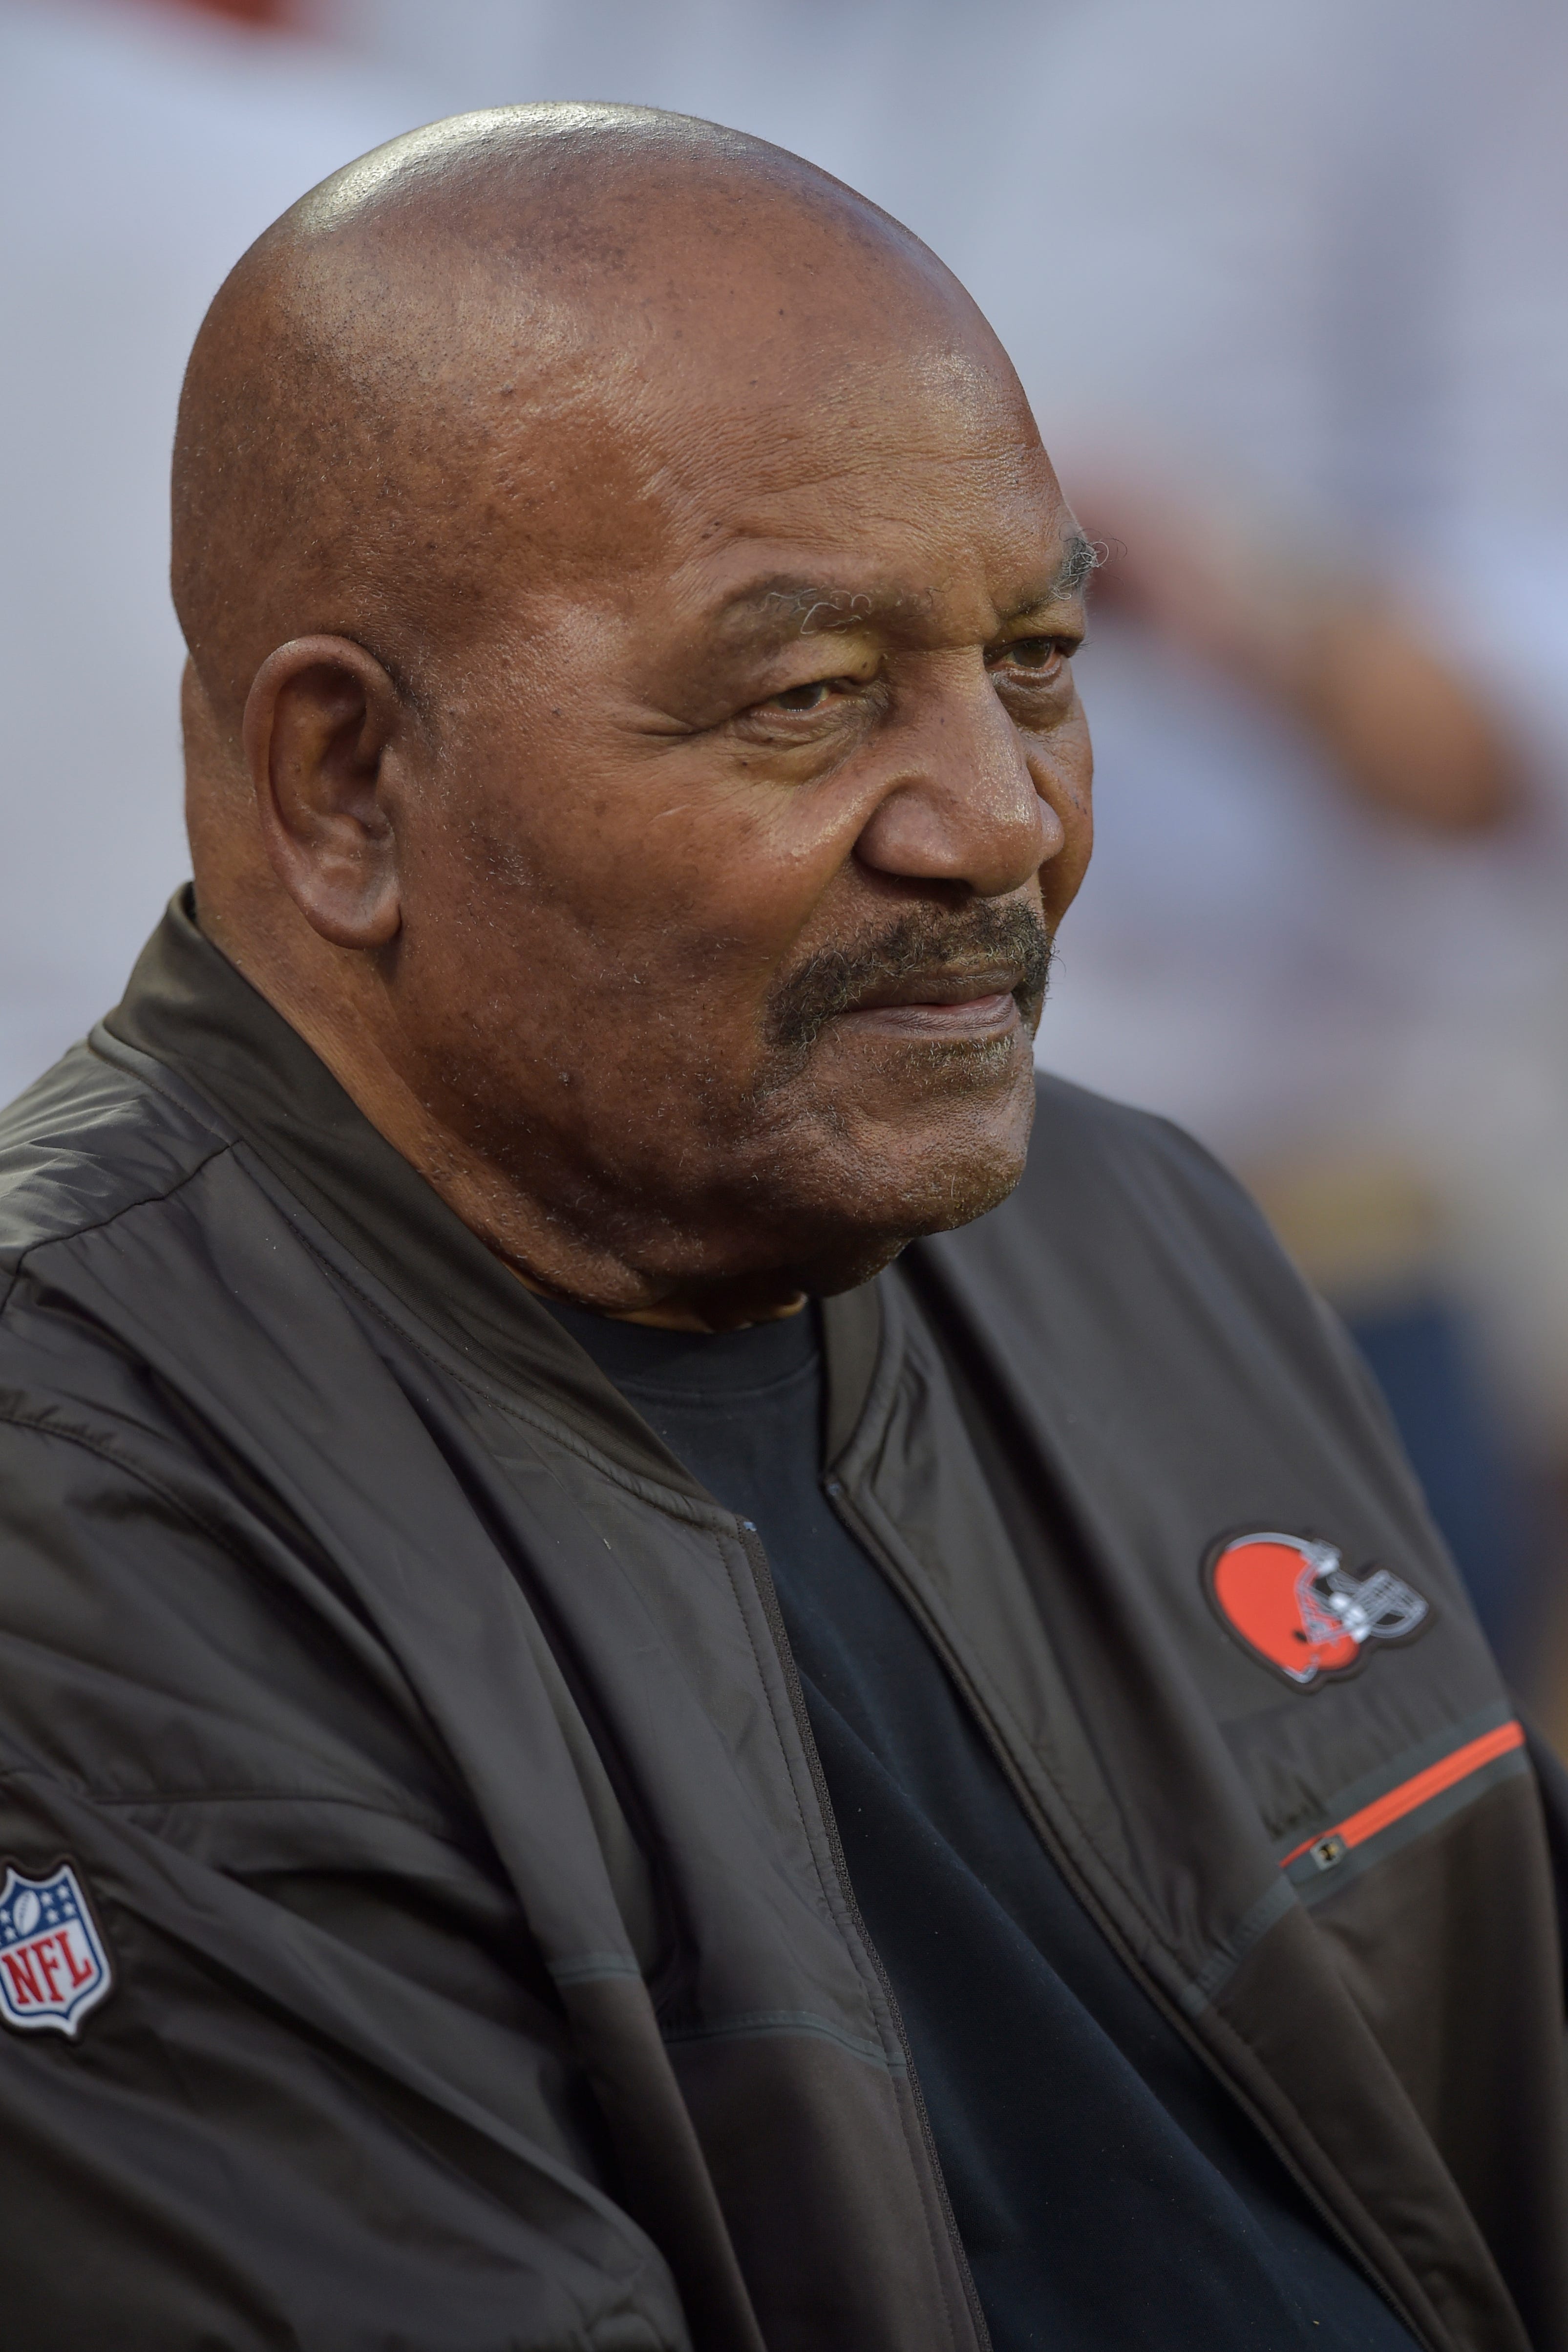 Nfl Why Jim Brown Is Not Among Greatest Players In Leagues